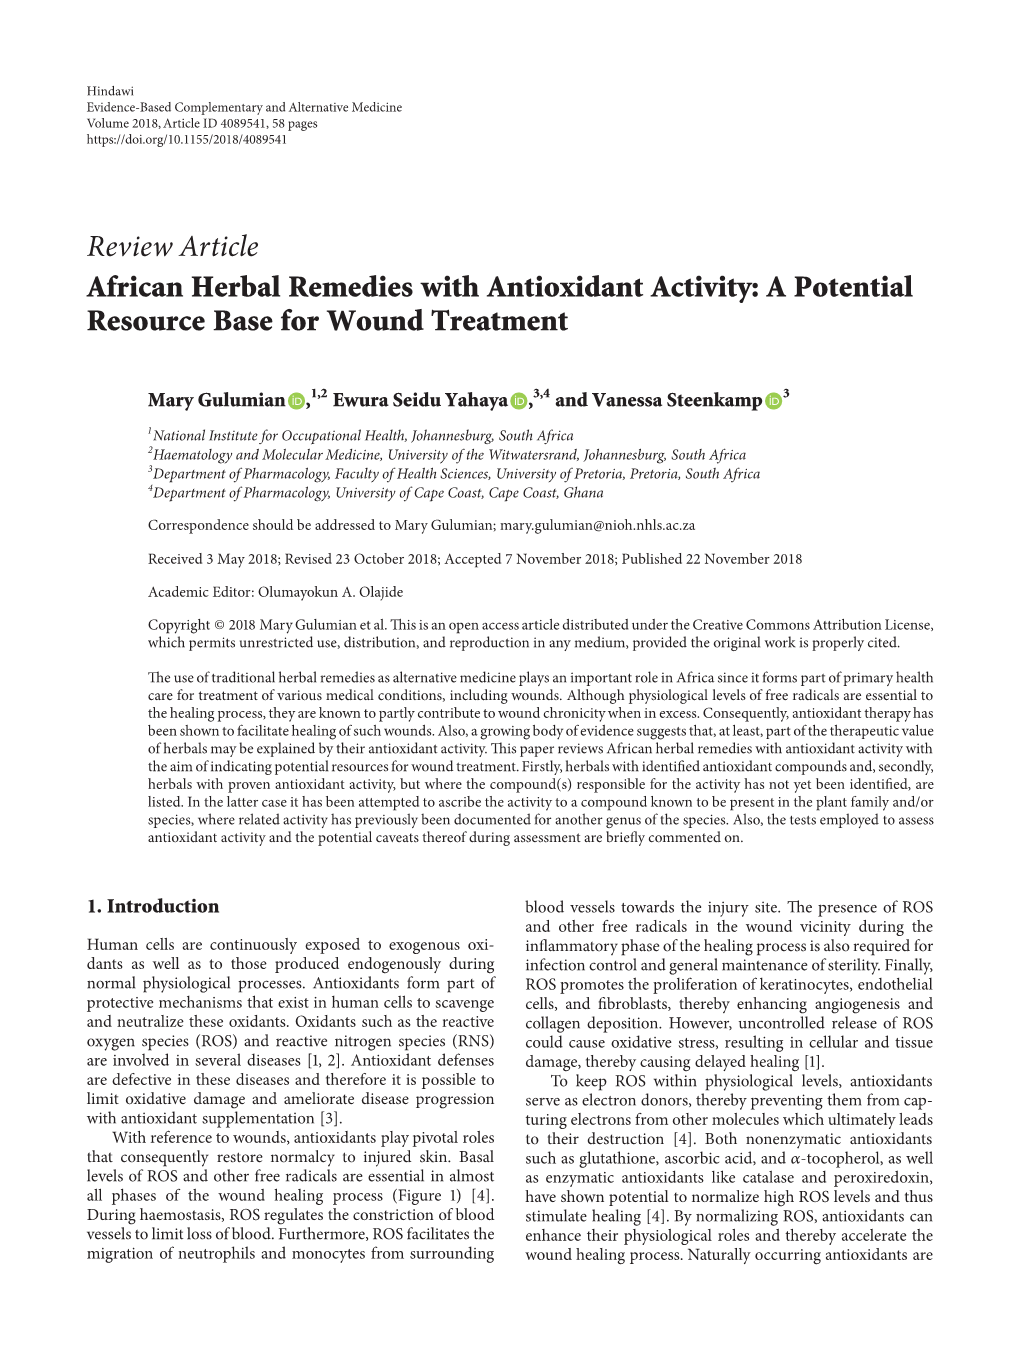 Review Article African Herbal Remedies with Antioxidant Activity: a Potential Resource Base for Wound Treatment